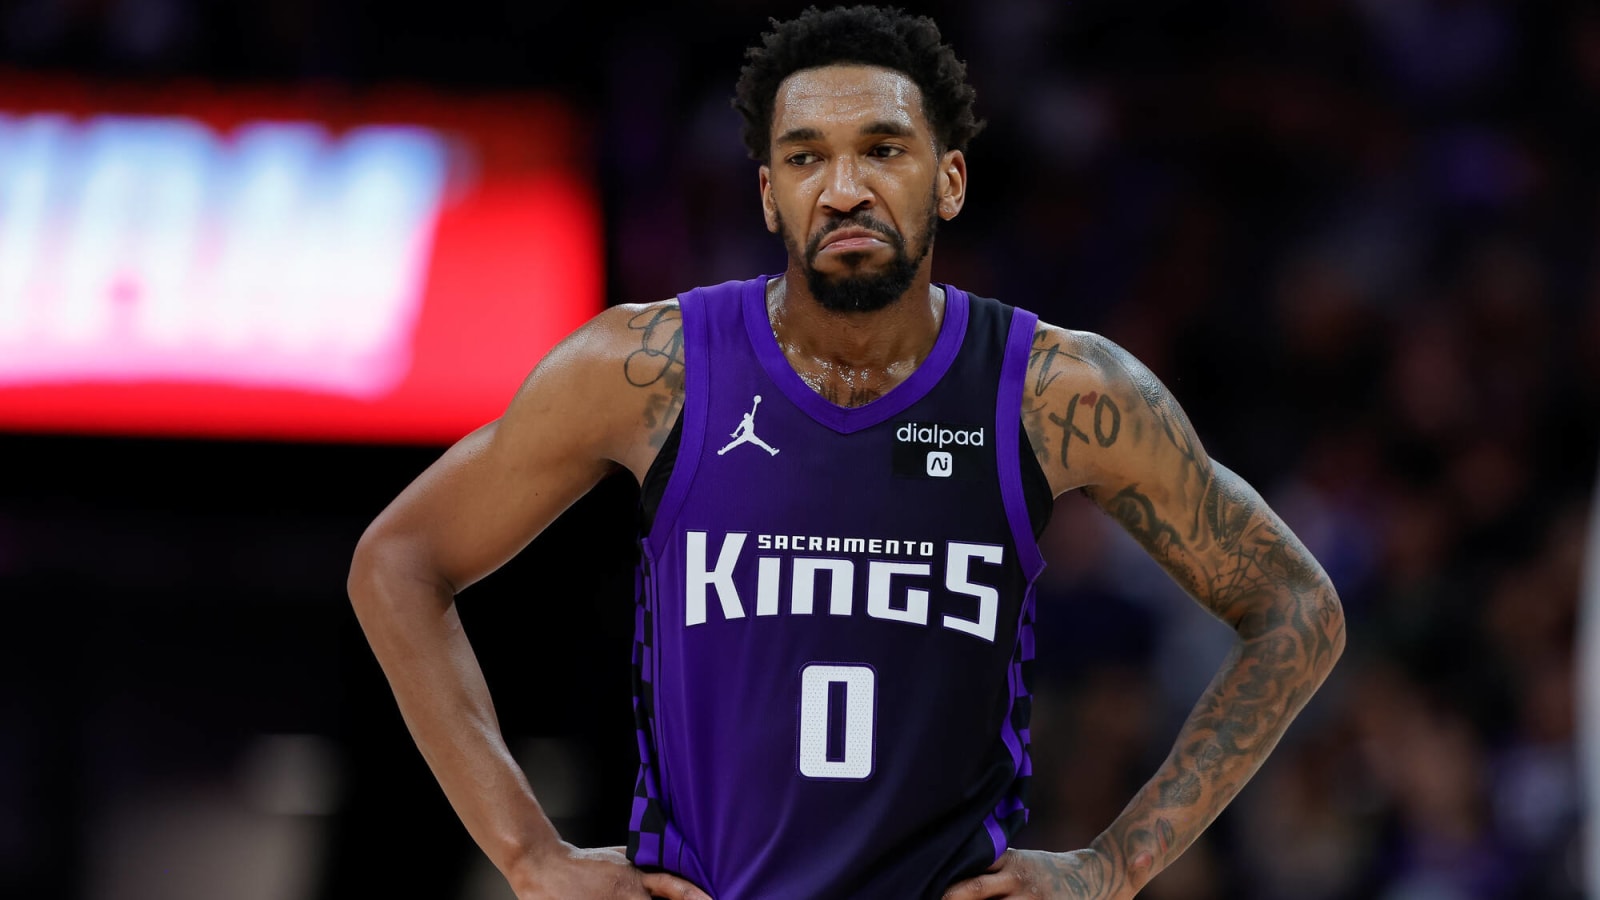 Kings, Sixth Man of the Year Candidate’s Worst Fears Confirmed